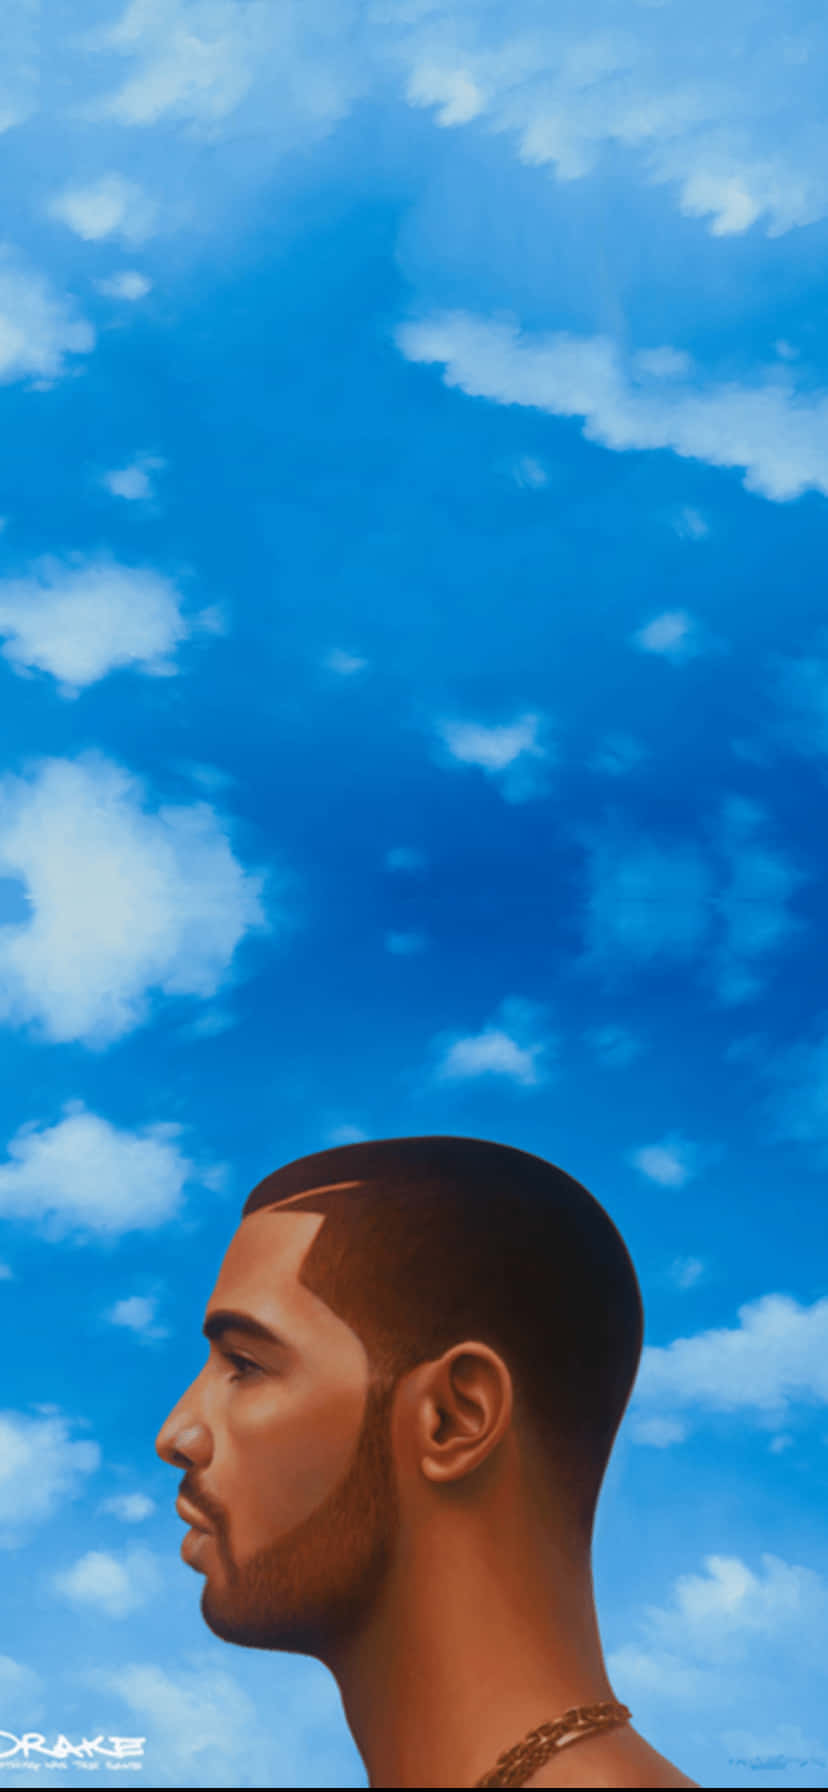 An Aesthetic View of Drake Wallpaper